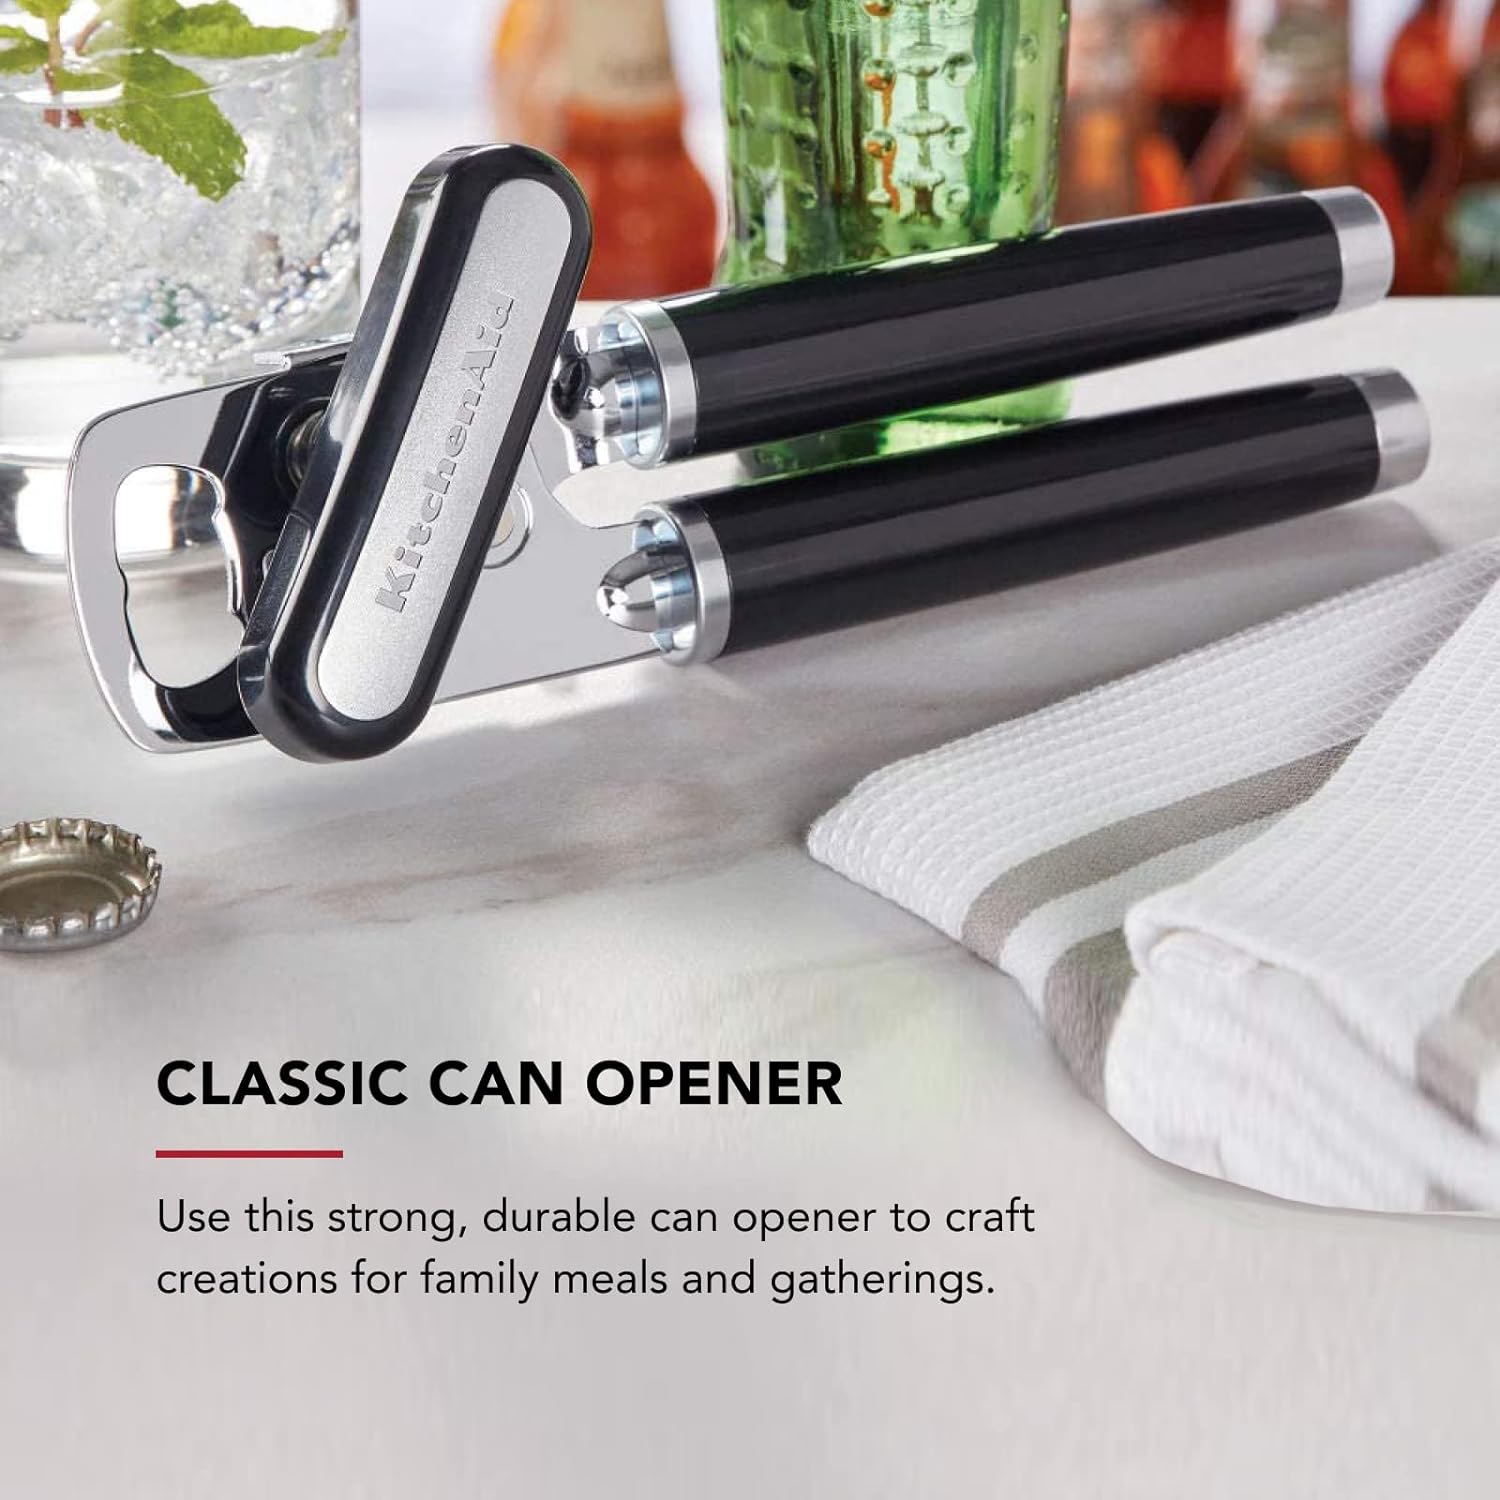 KitchenAid Classic Multifunction Can Opener and Bottle Opener